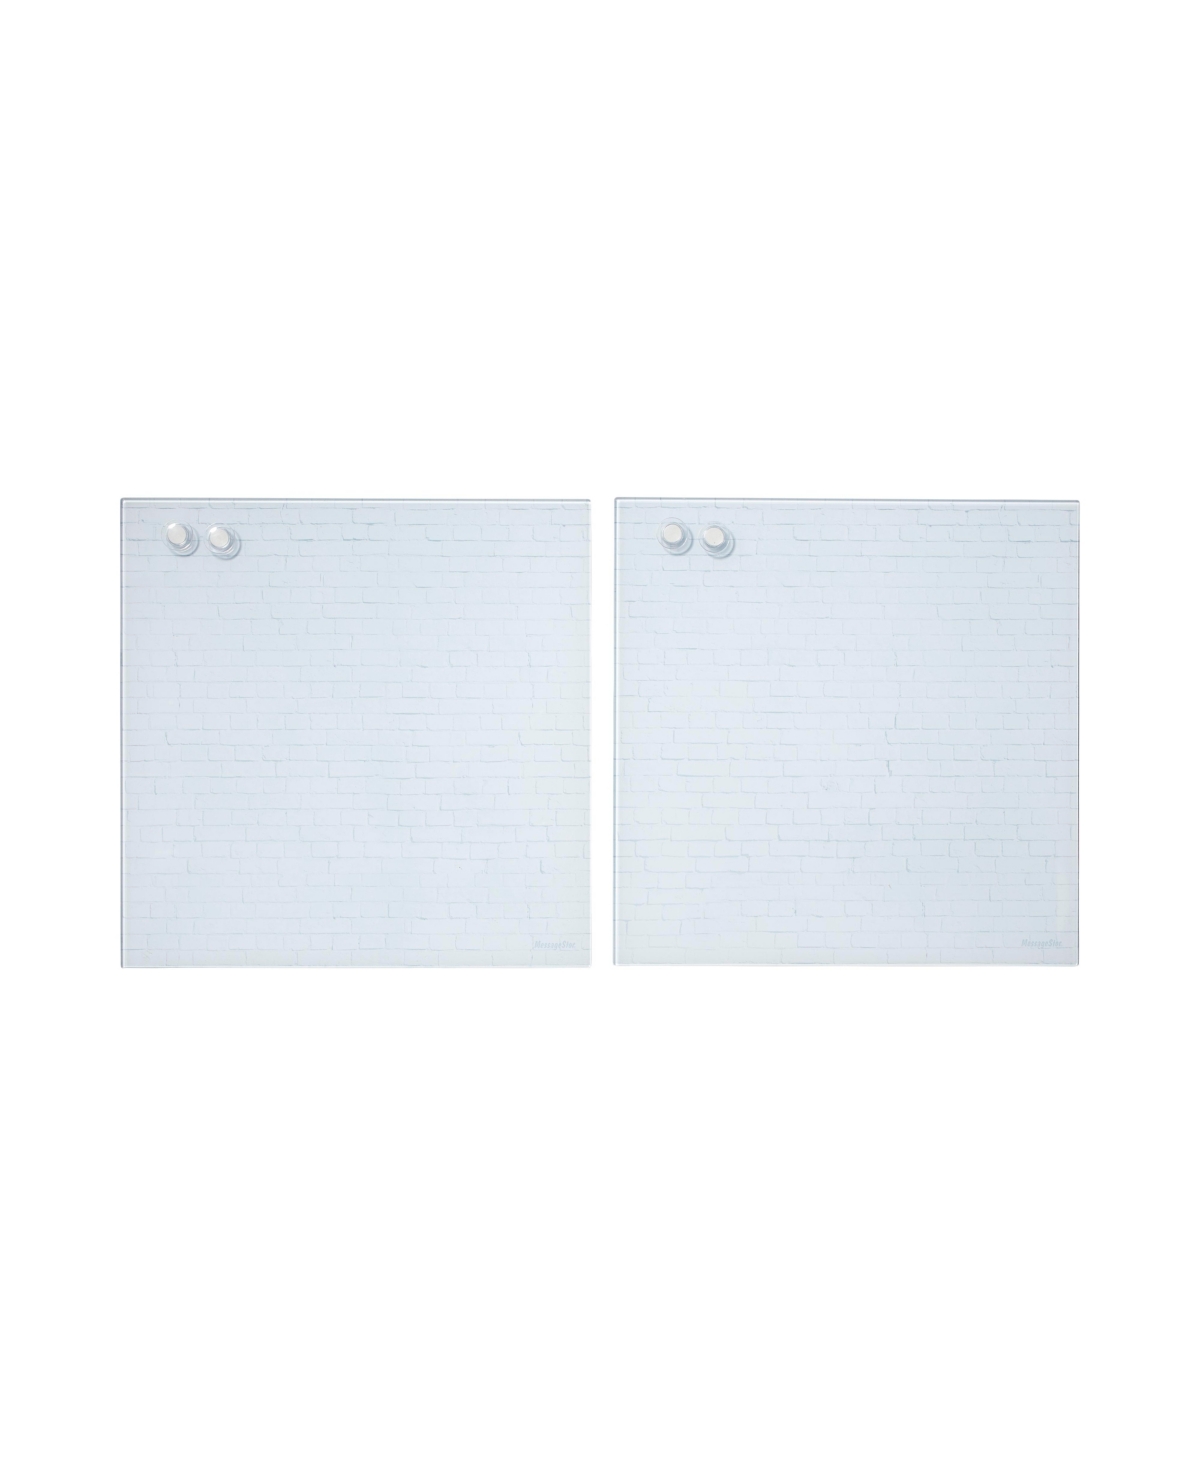 MessageStor Magnetic Dry-Erase Glass Board with Magnets, 17.5in x 17.5in, White Waves, 2-Pack - Botanical